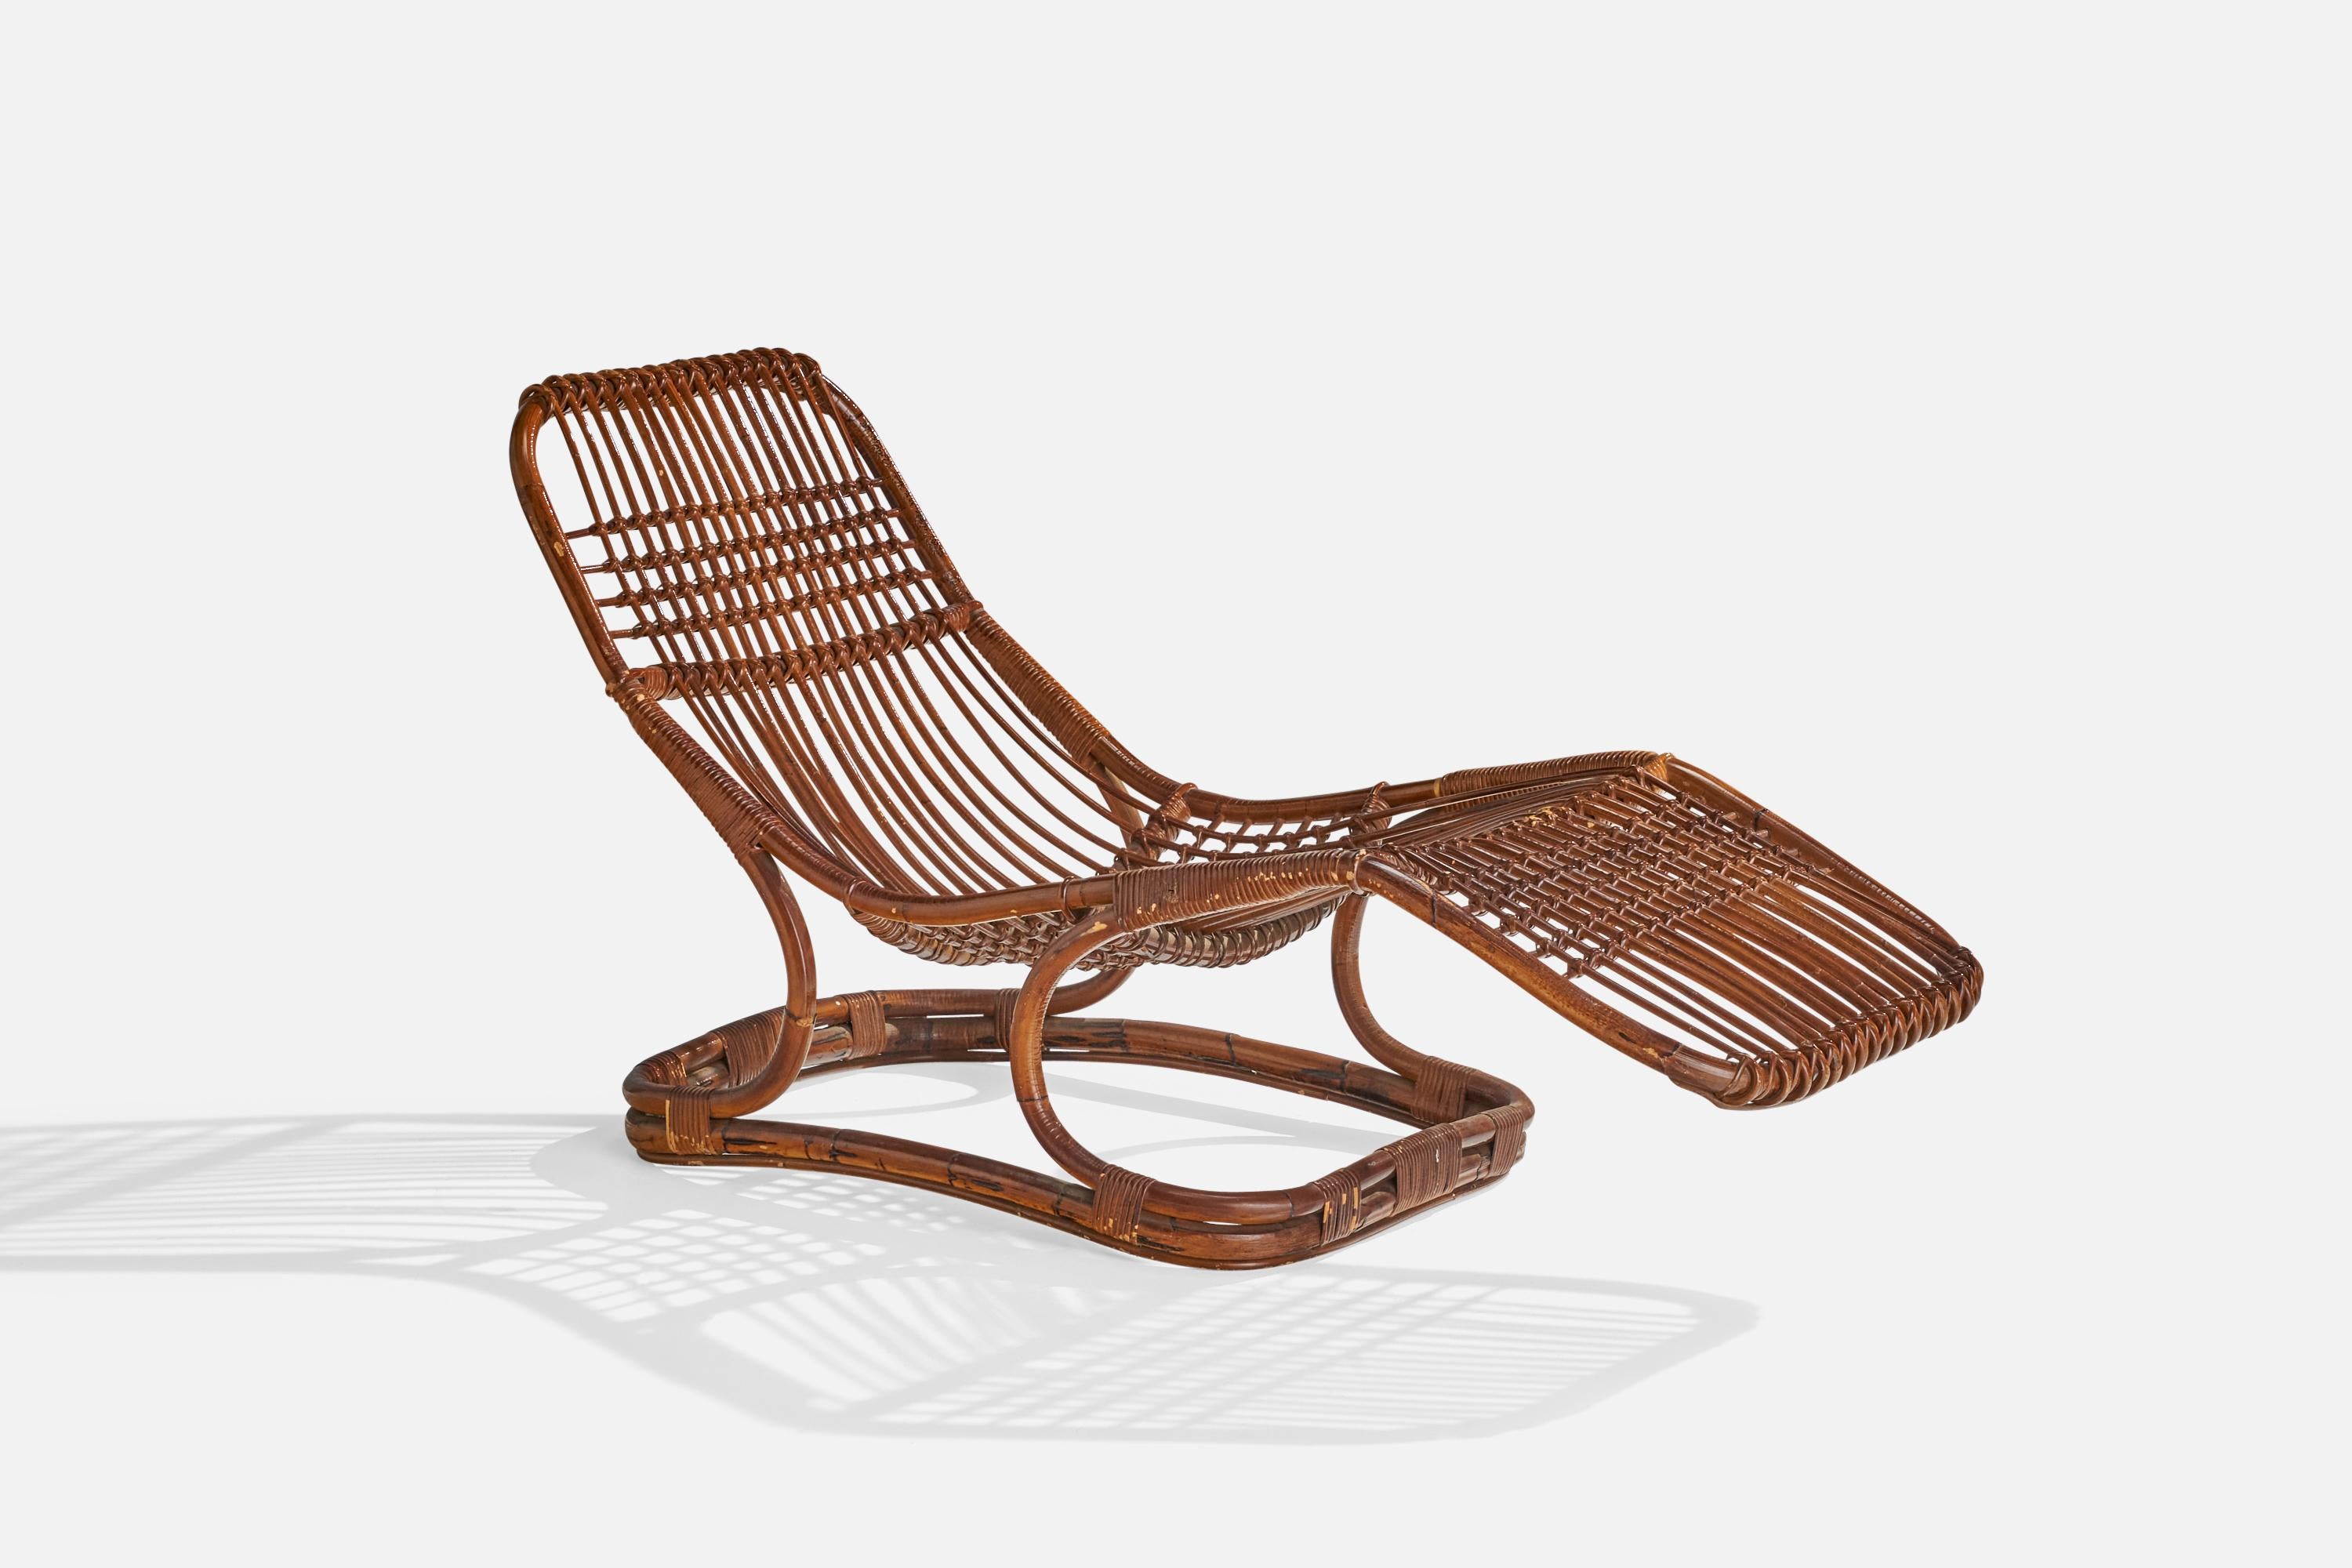 A moulded bamboo and rattan chaise longue designed by Tito Agnoli and produced by Pierantonio Bonacina, Italy, 1963.